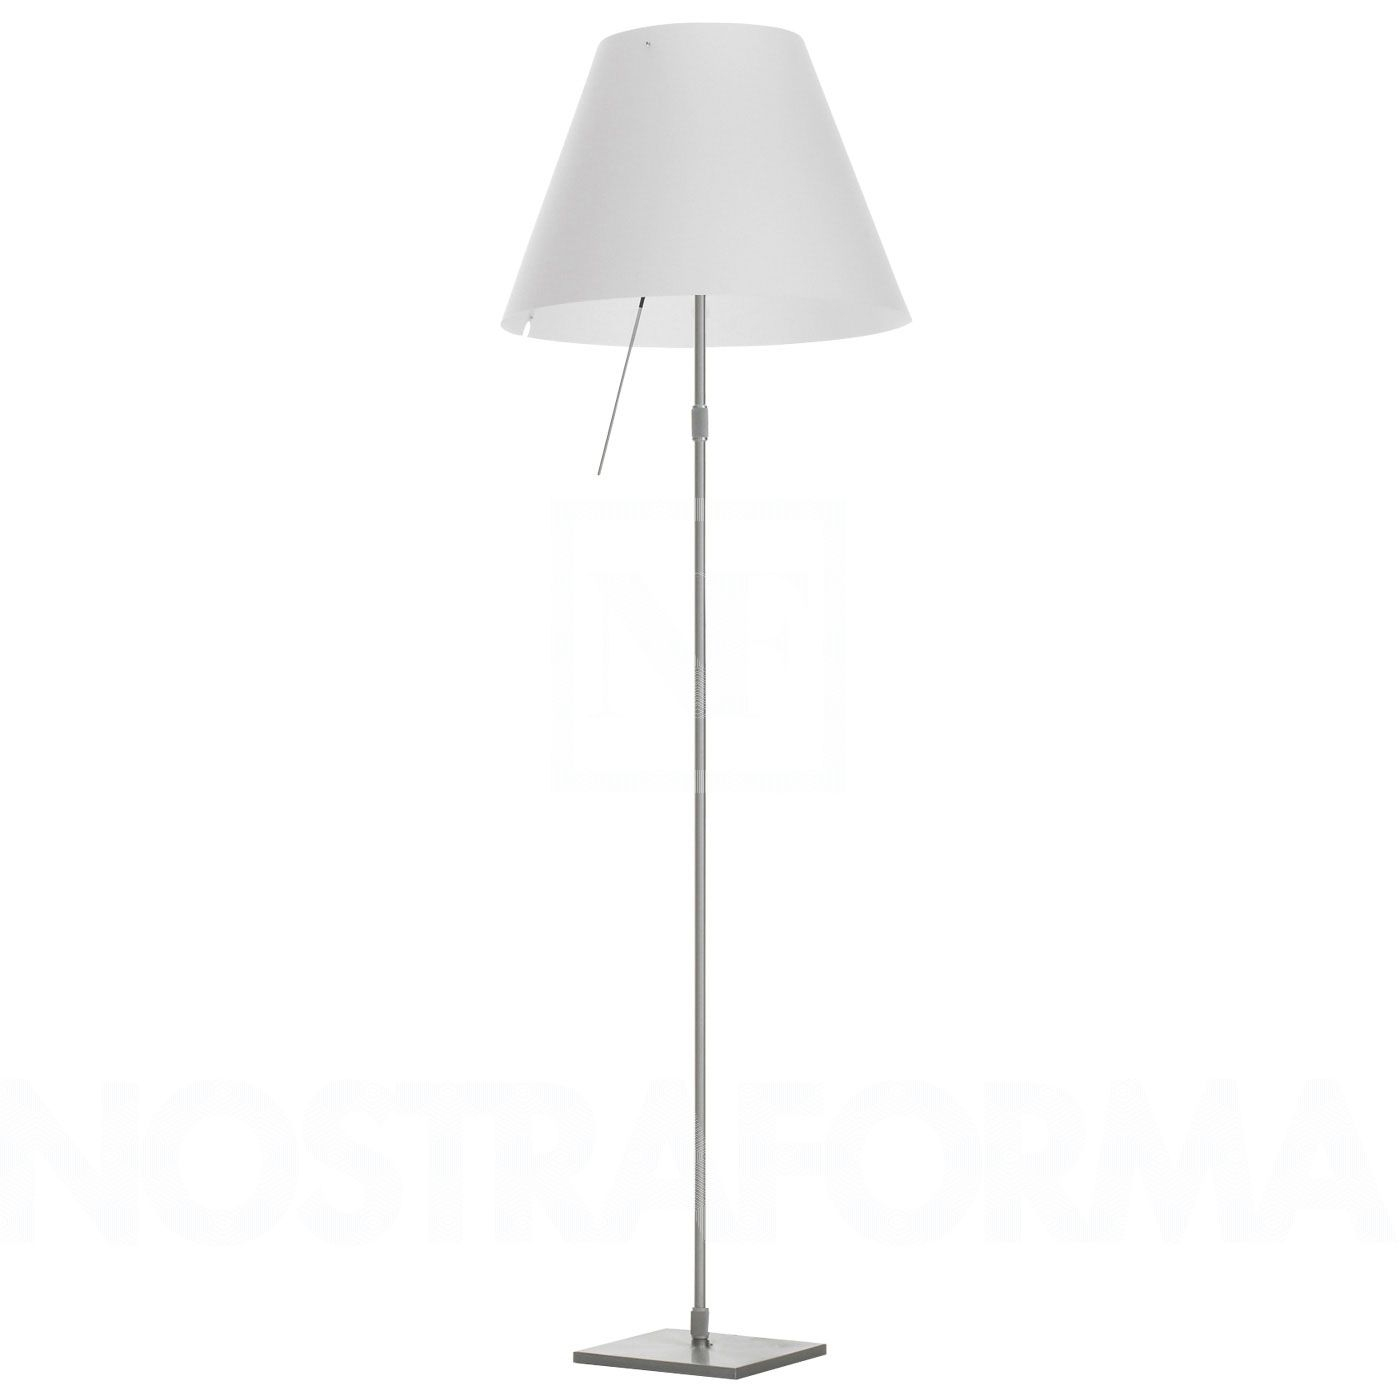 Luceplan Costanza Dimmable Aluminium Floor Lamp throughout sizing 1400 X 1400